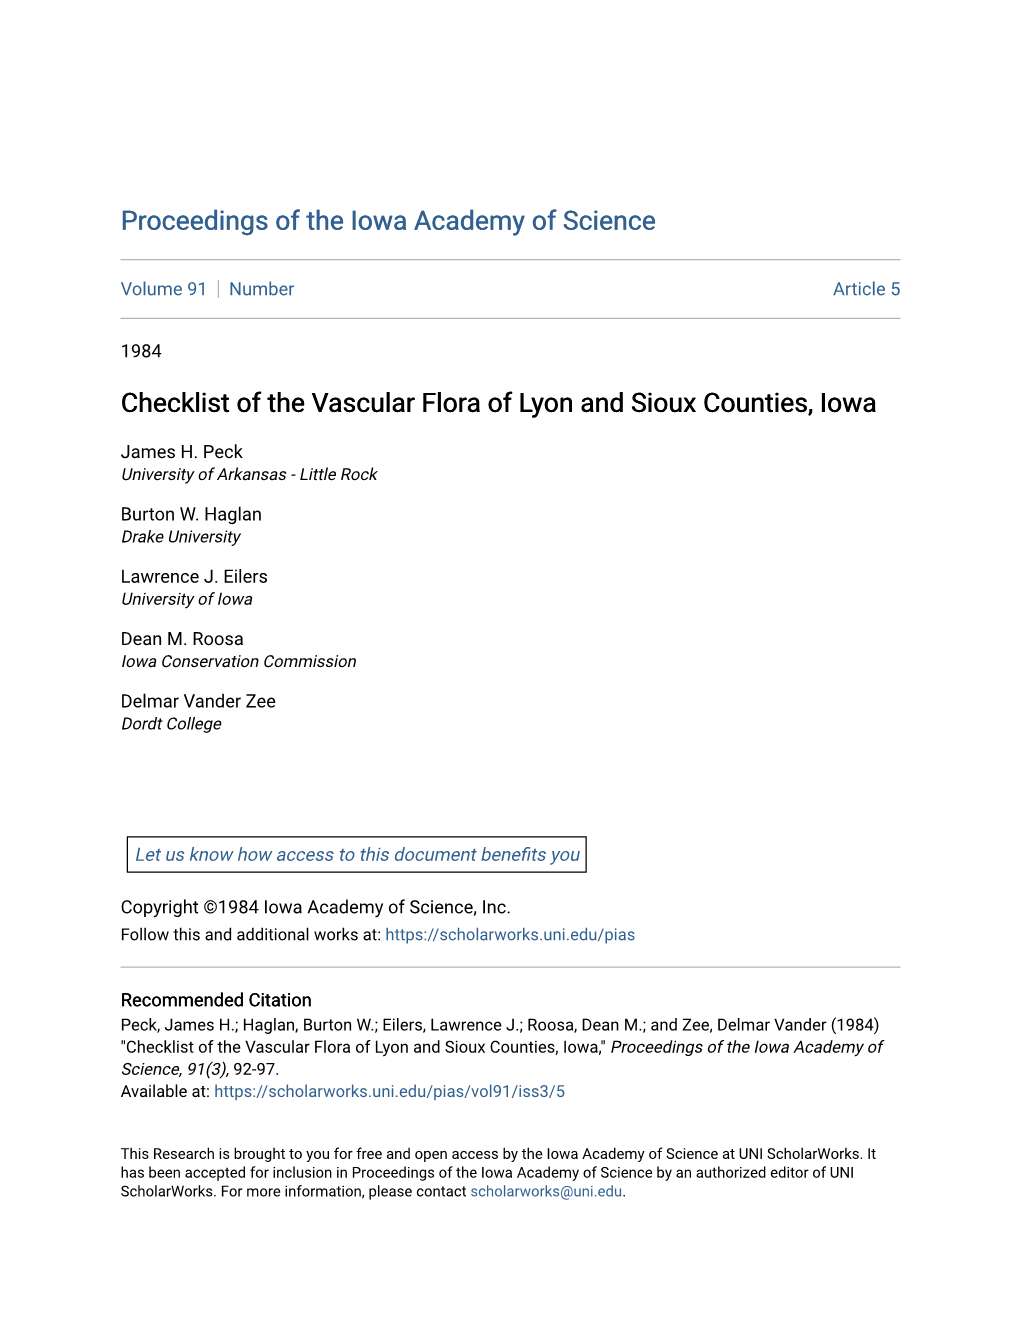 Checklist of the Vascular Flora of Lyon and Sioux Counties, Iowa